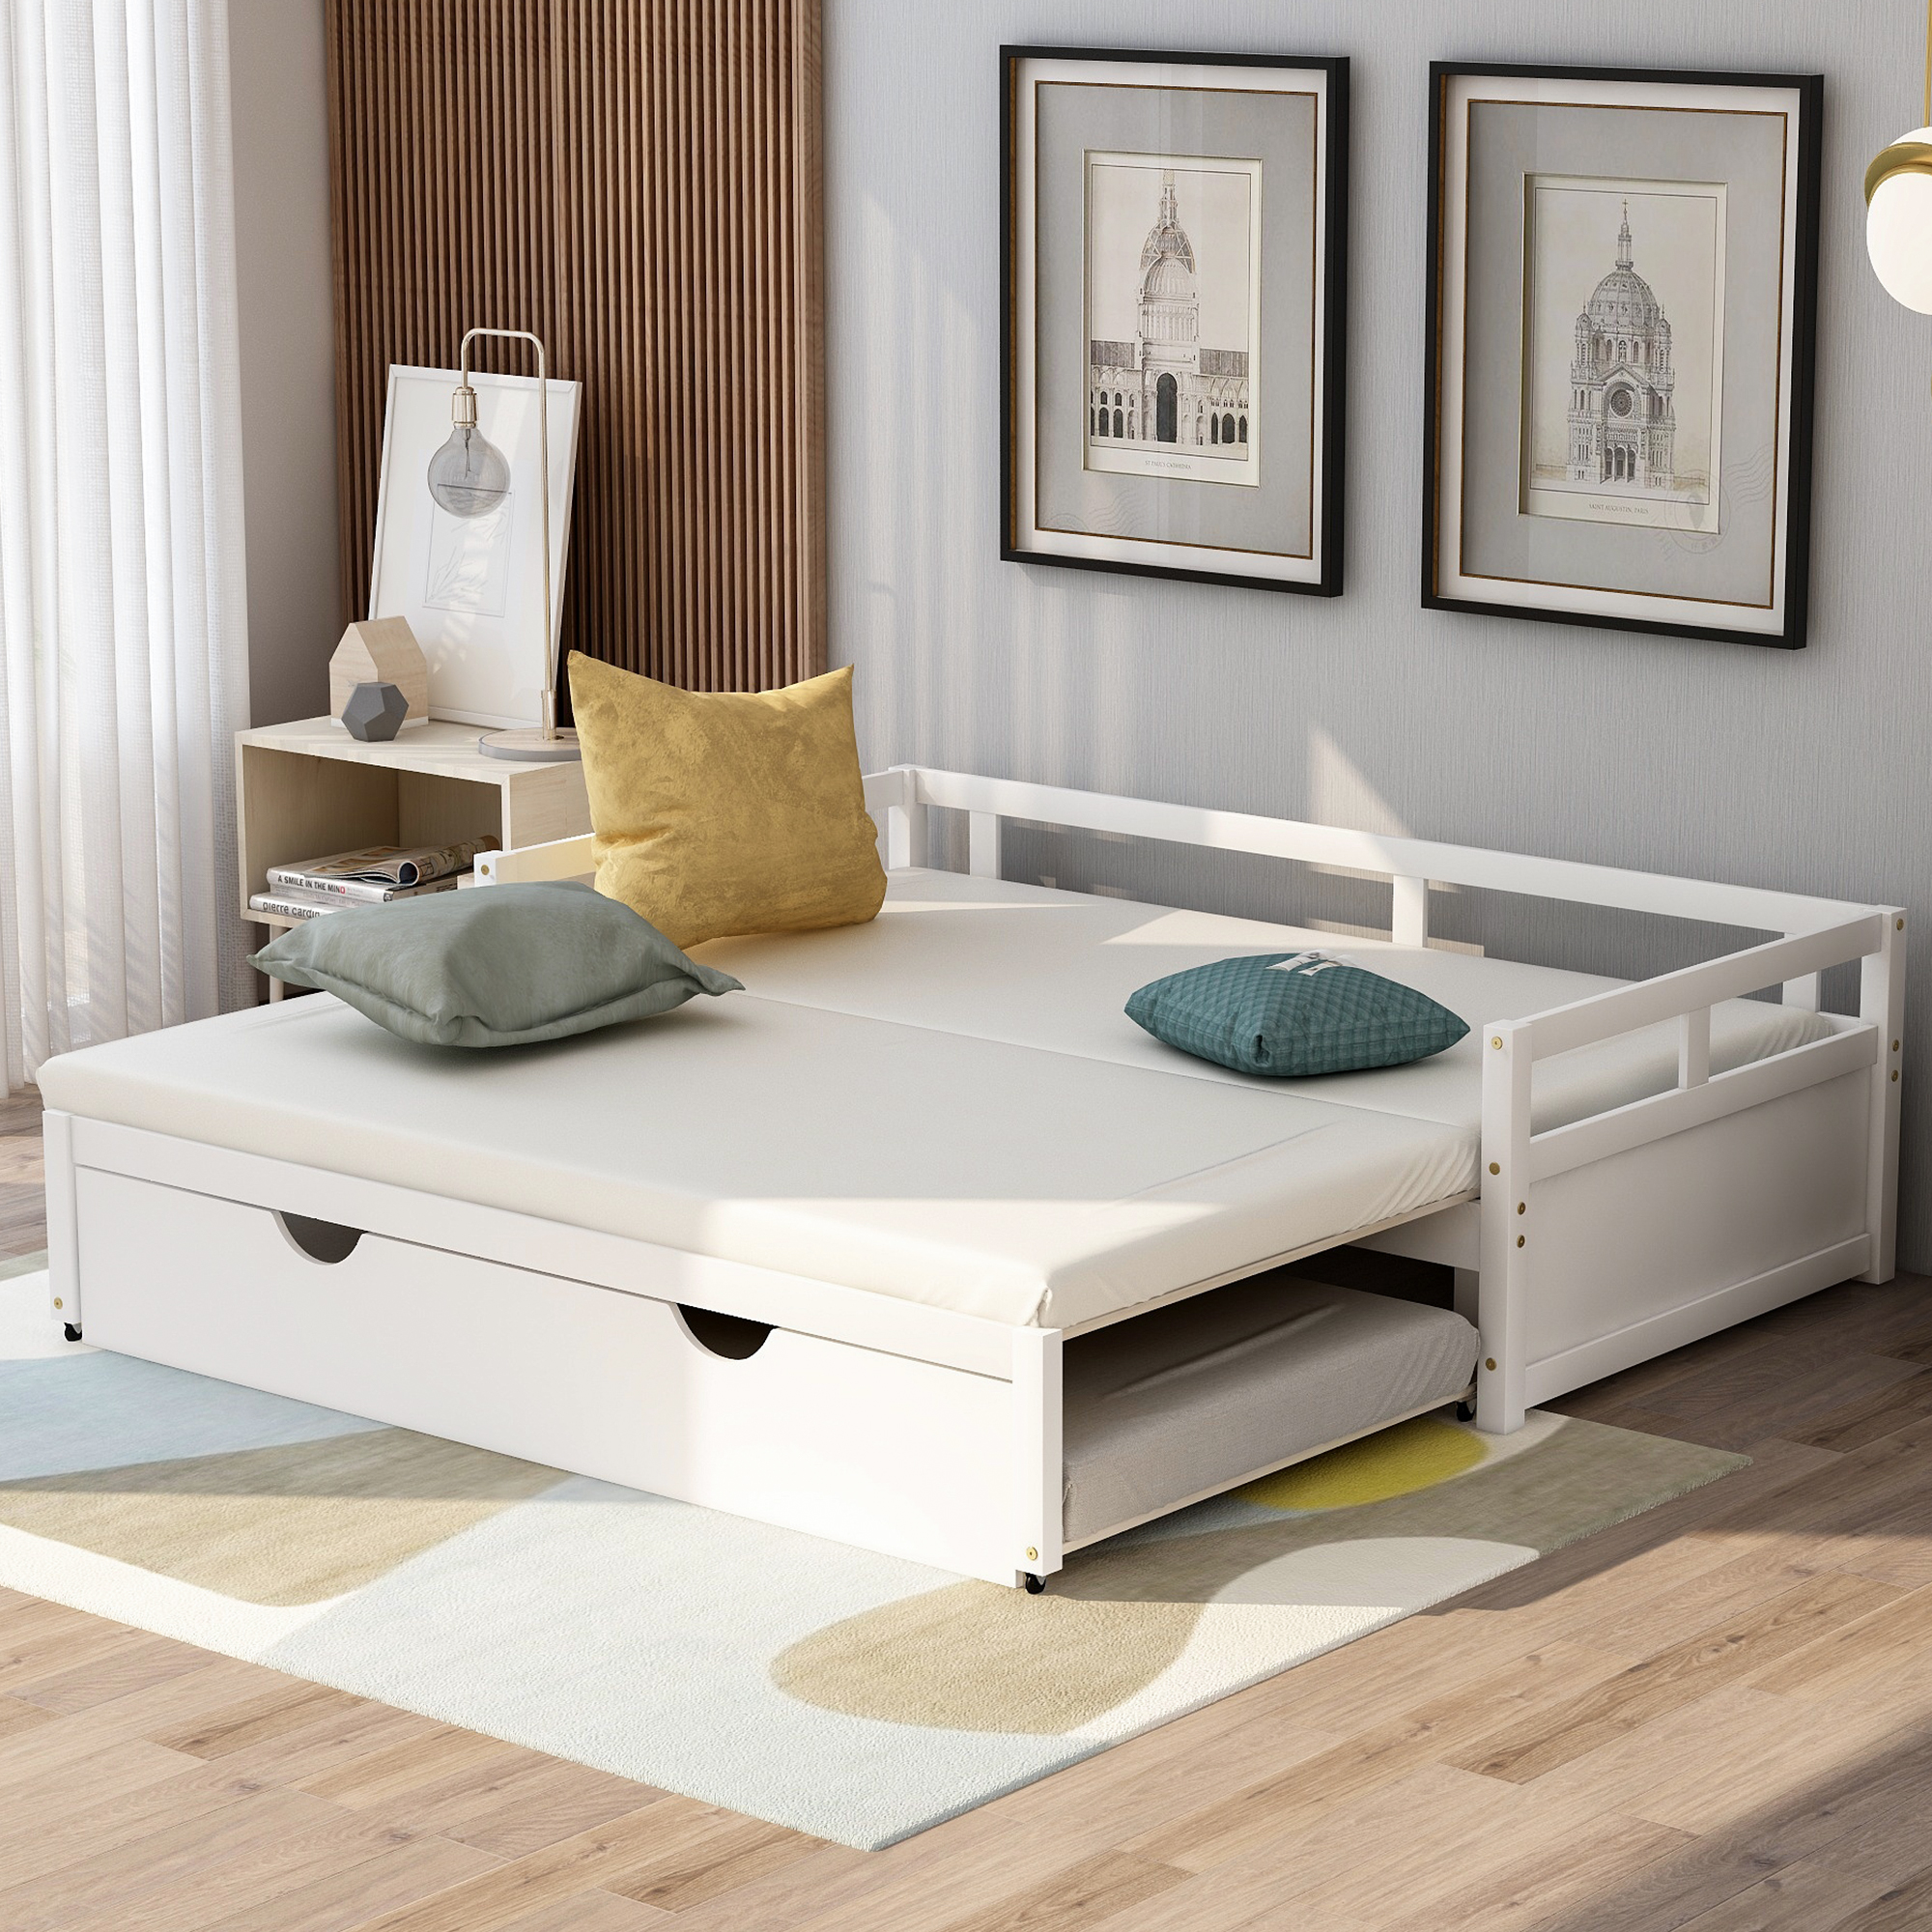 Extending Daybed with Trundle,&nbsp;Wooden Daybed with Trundle, White-Boyel Living